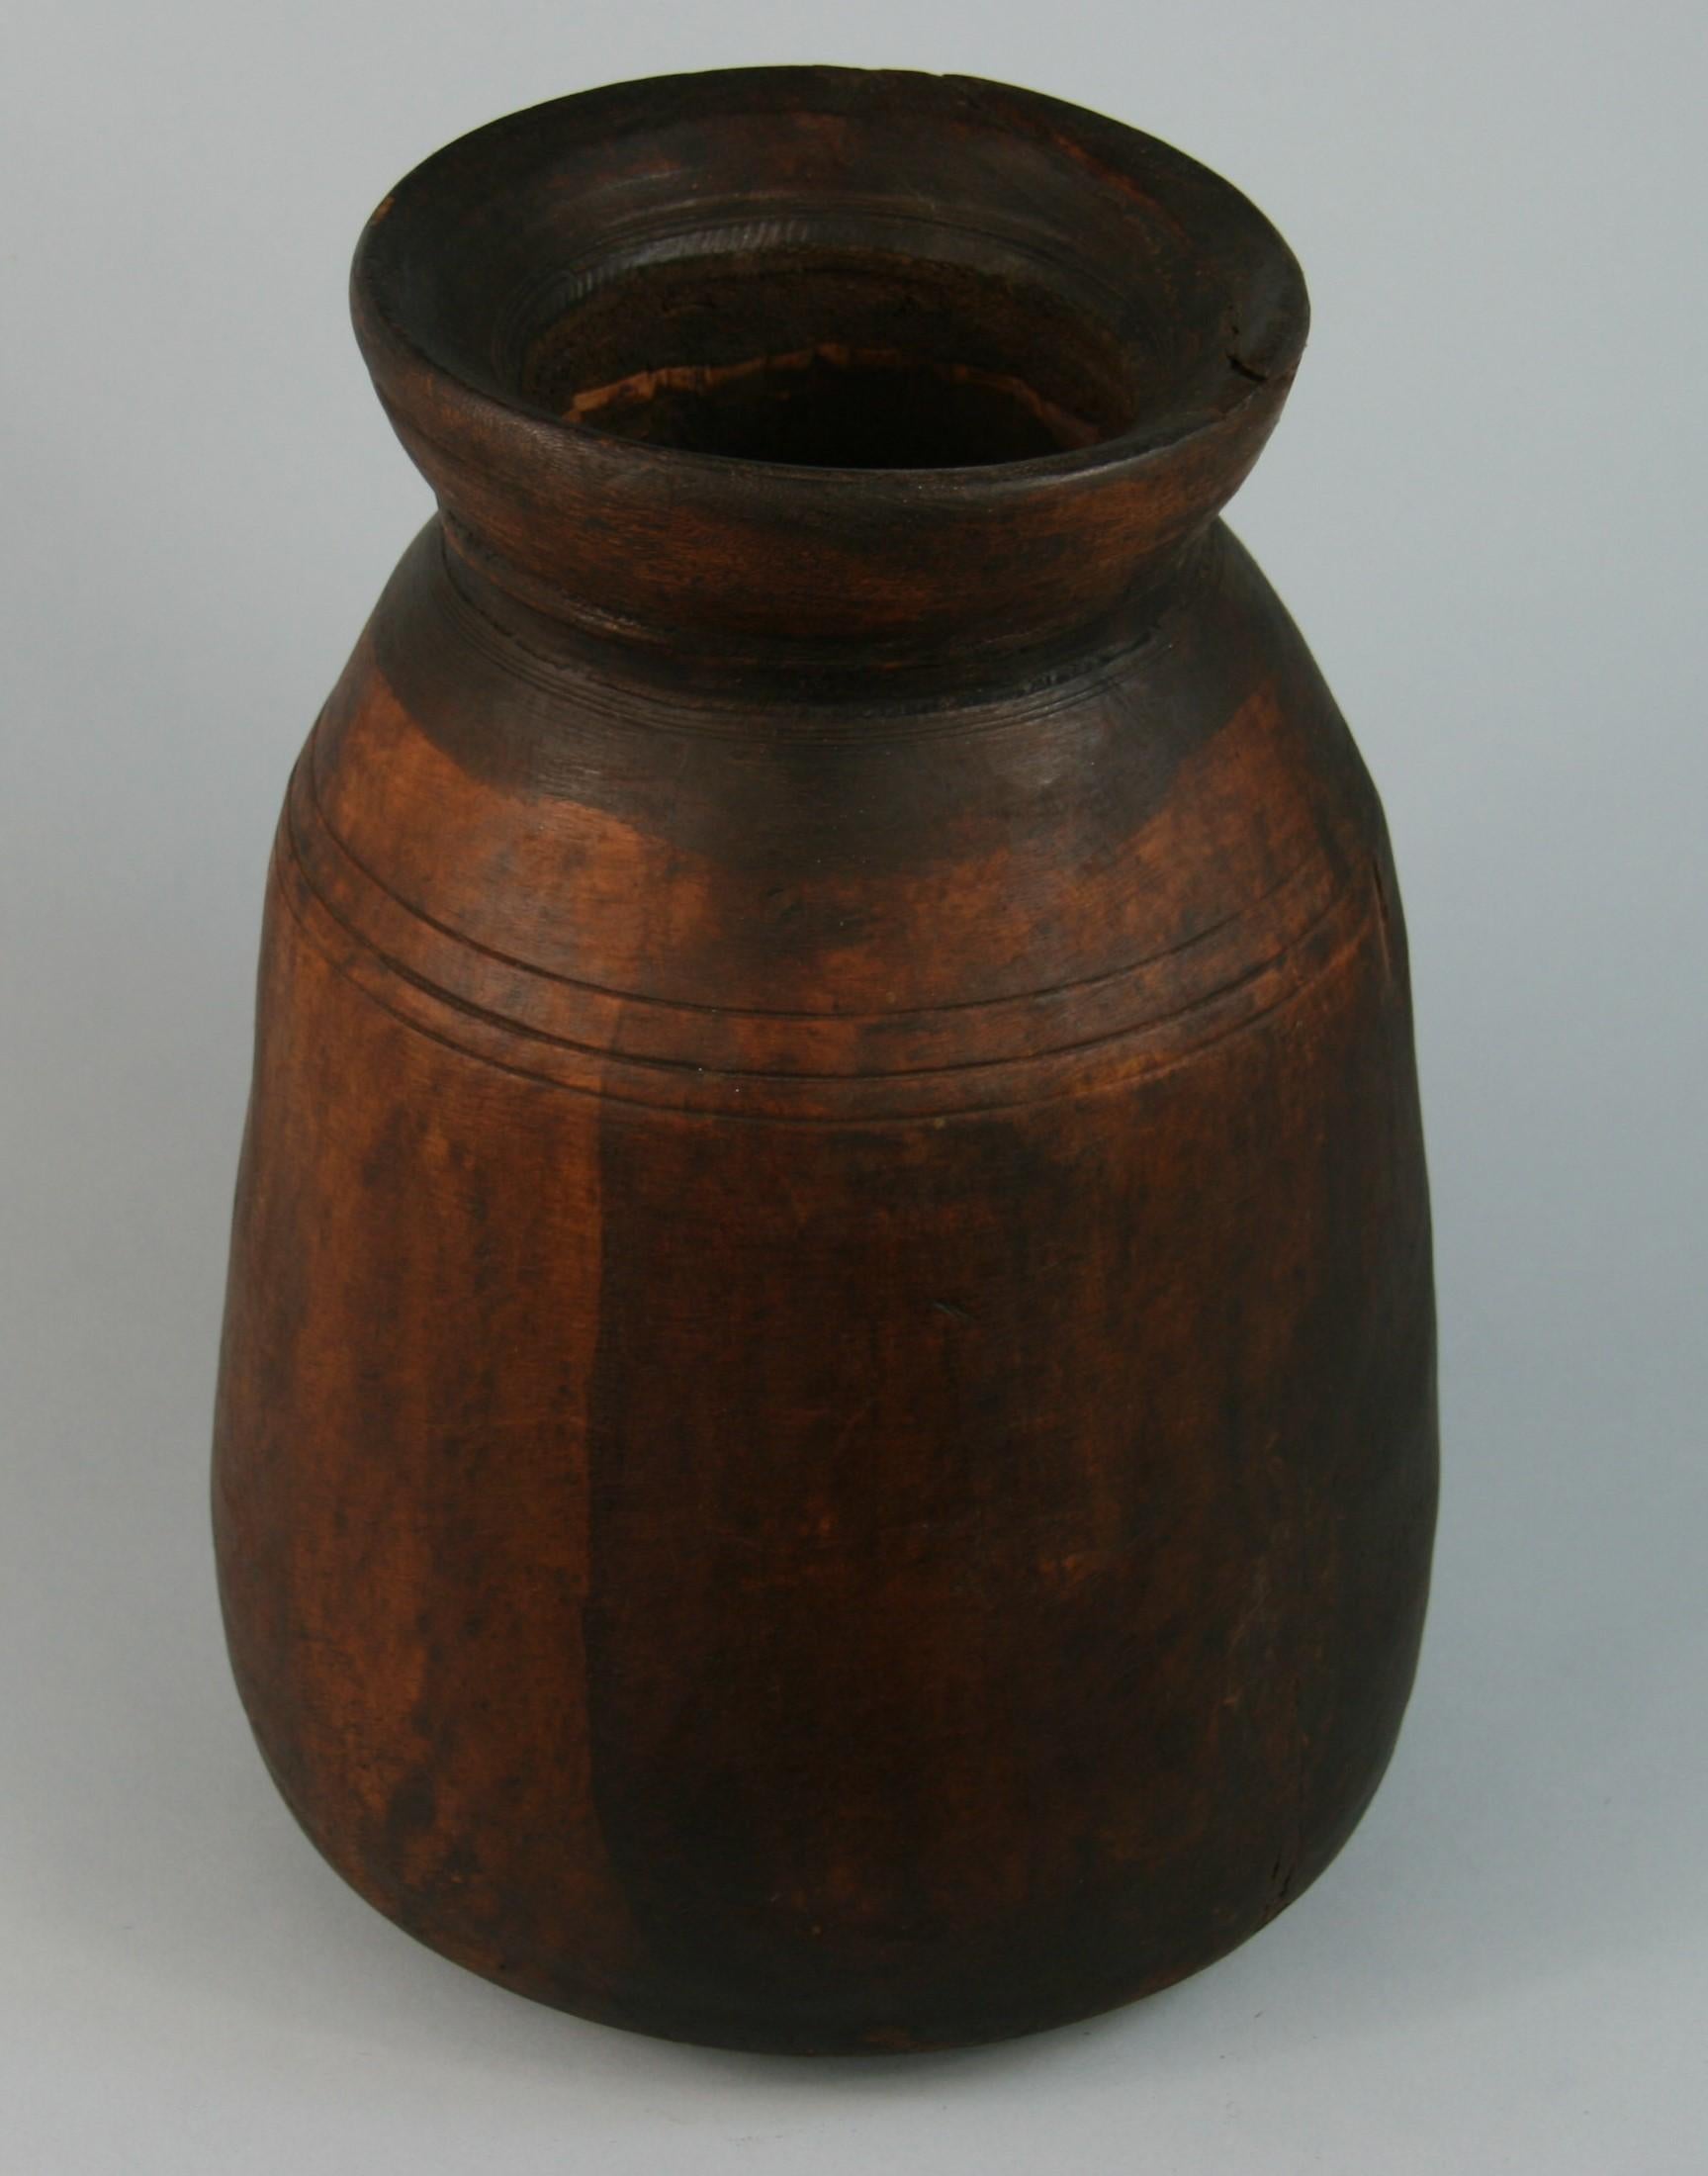 3-614 hand turned wood rustic wood container/vase.